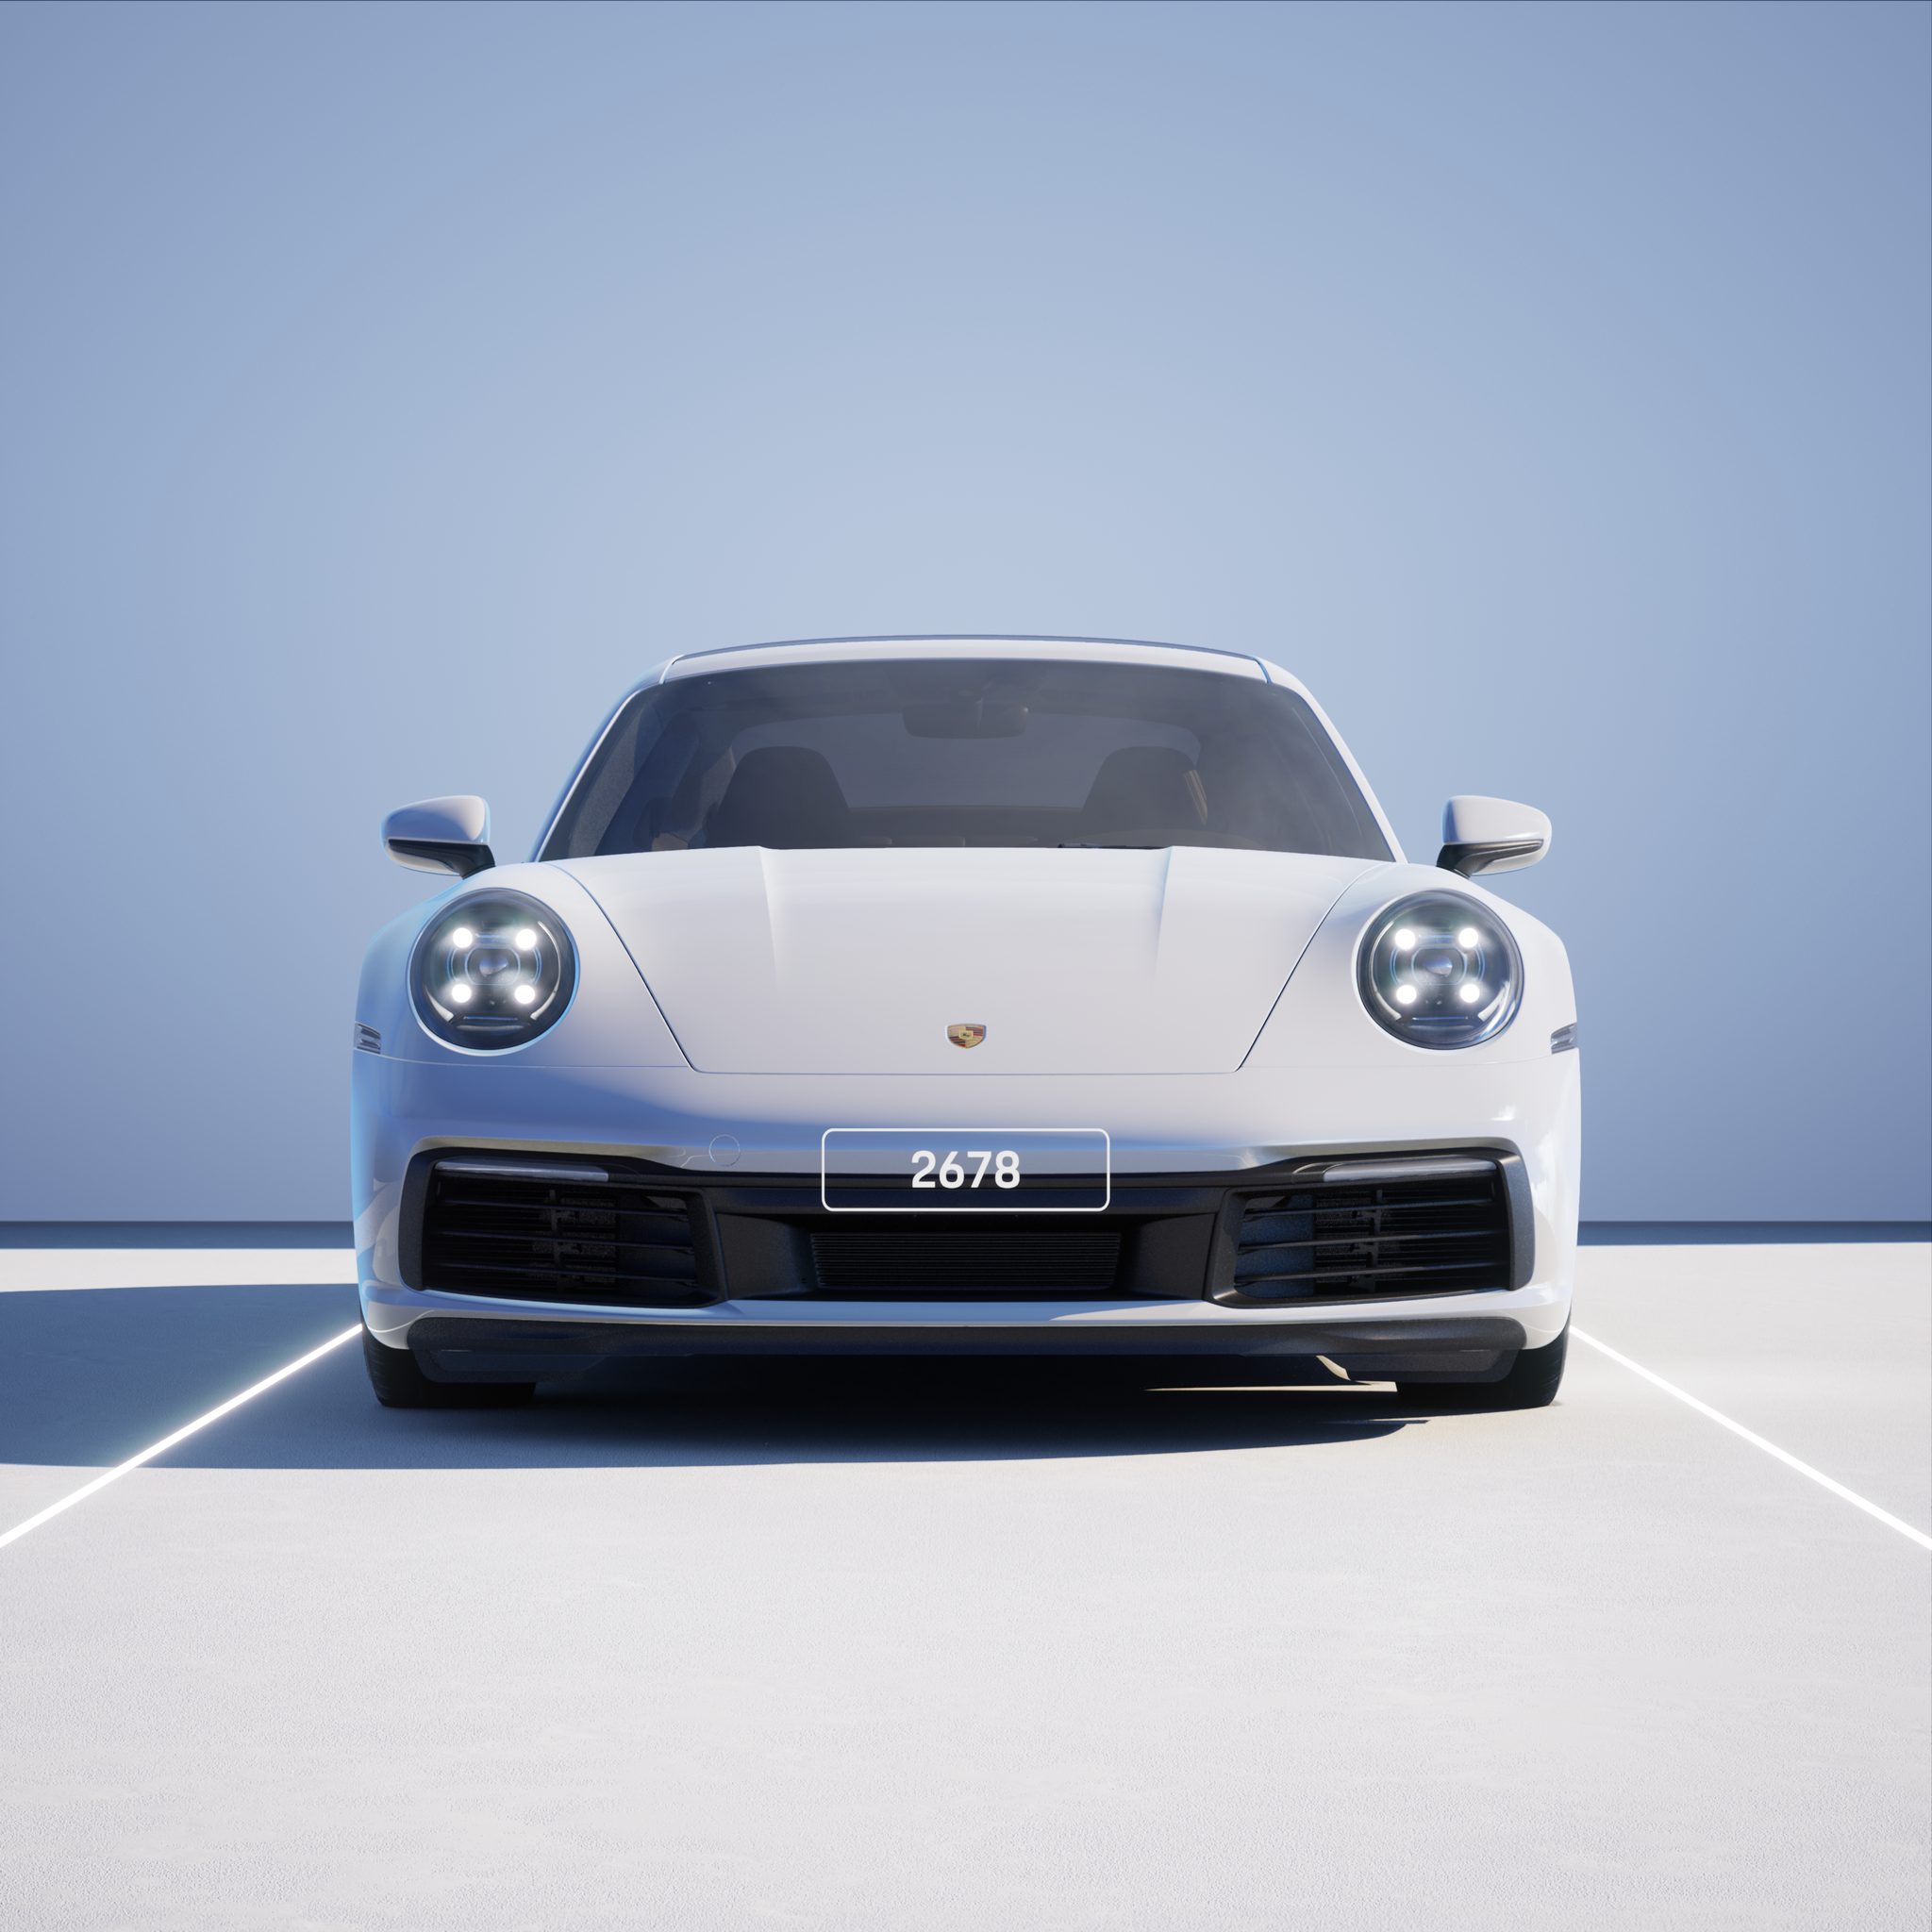 The PORSCHΞ 911 2678 image in phase